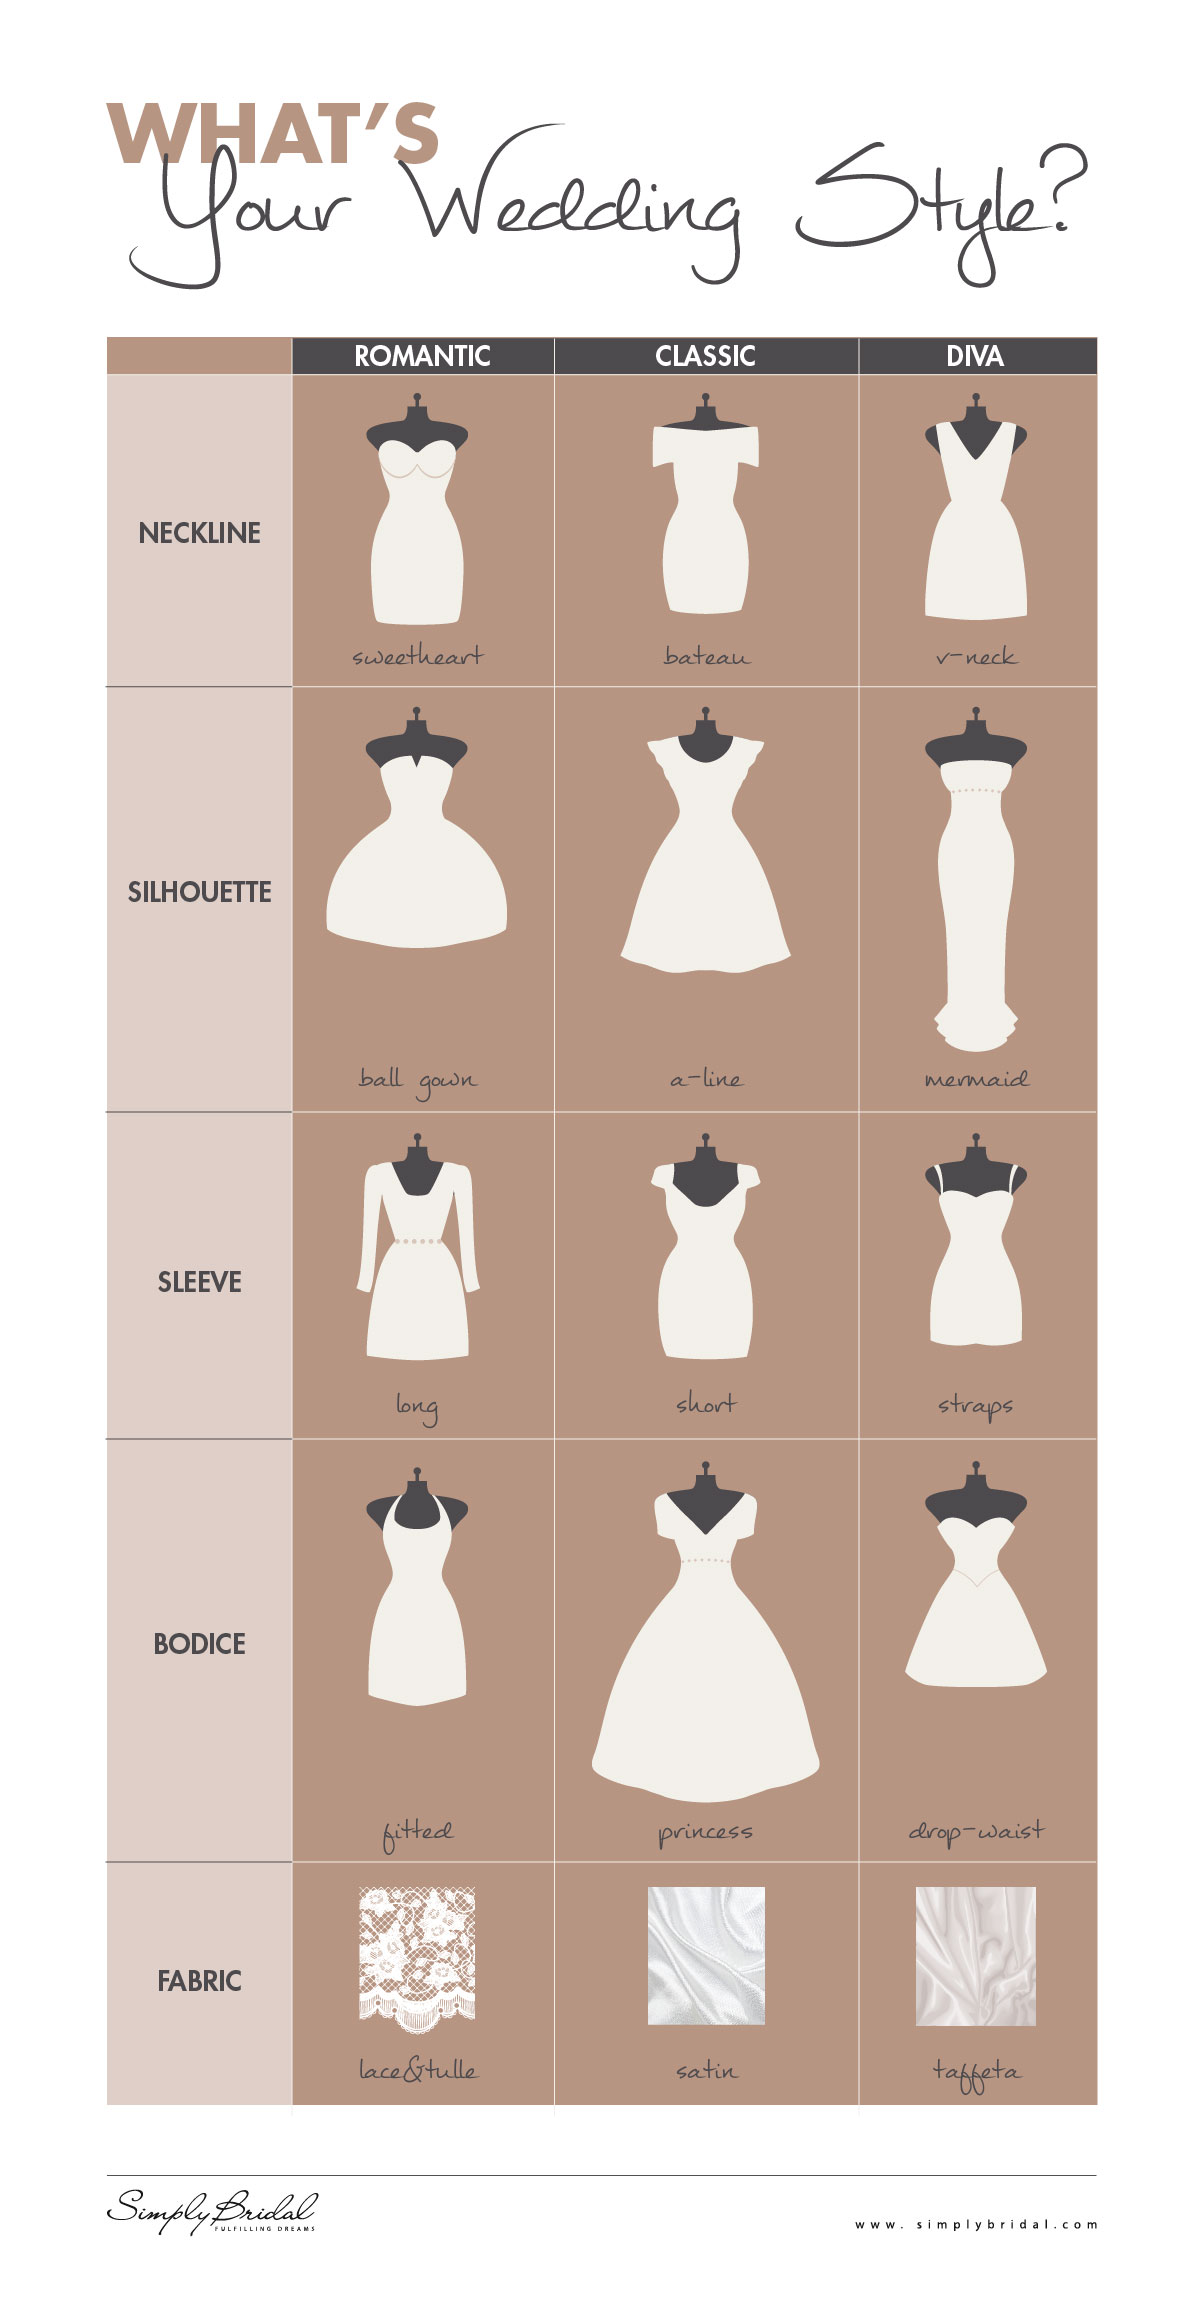 Styles Of Wedding Dresses With Names  Overlay Wedding Dresses